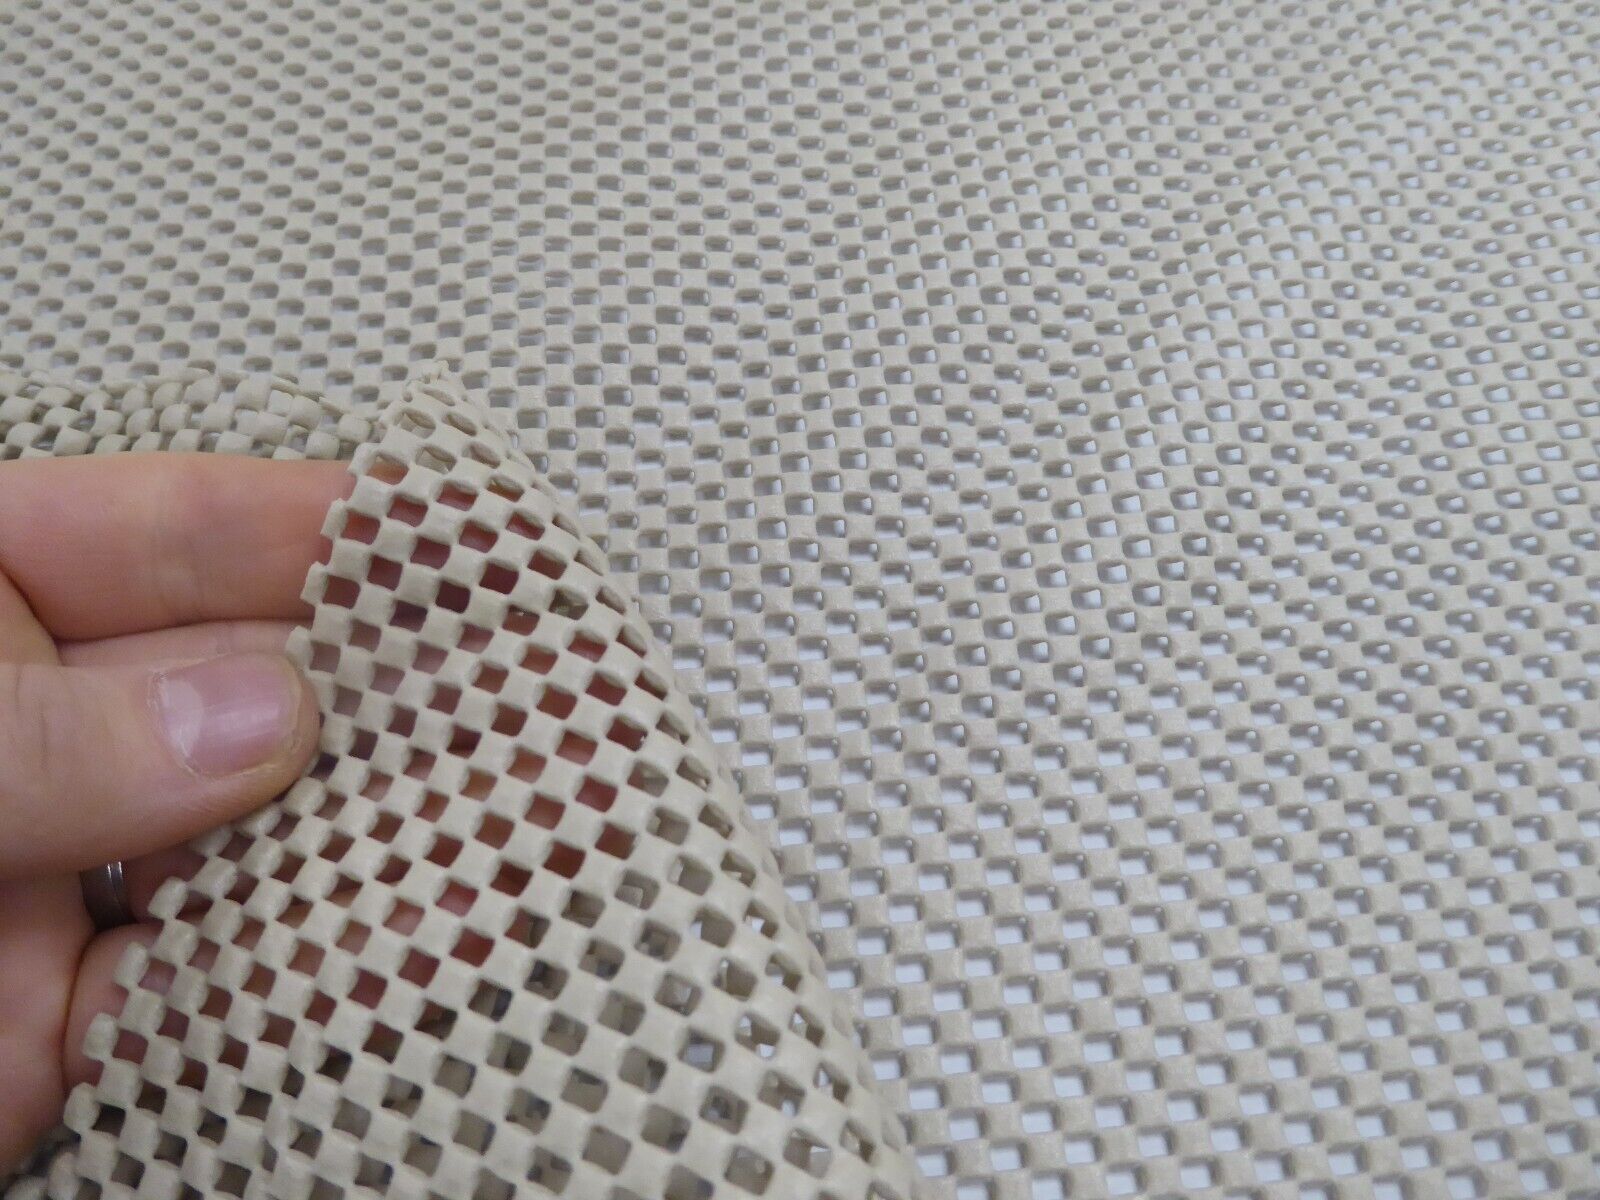 Bumpy Non-Slip Grip Fabric for Sewing